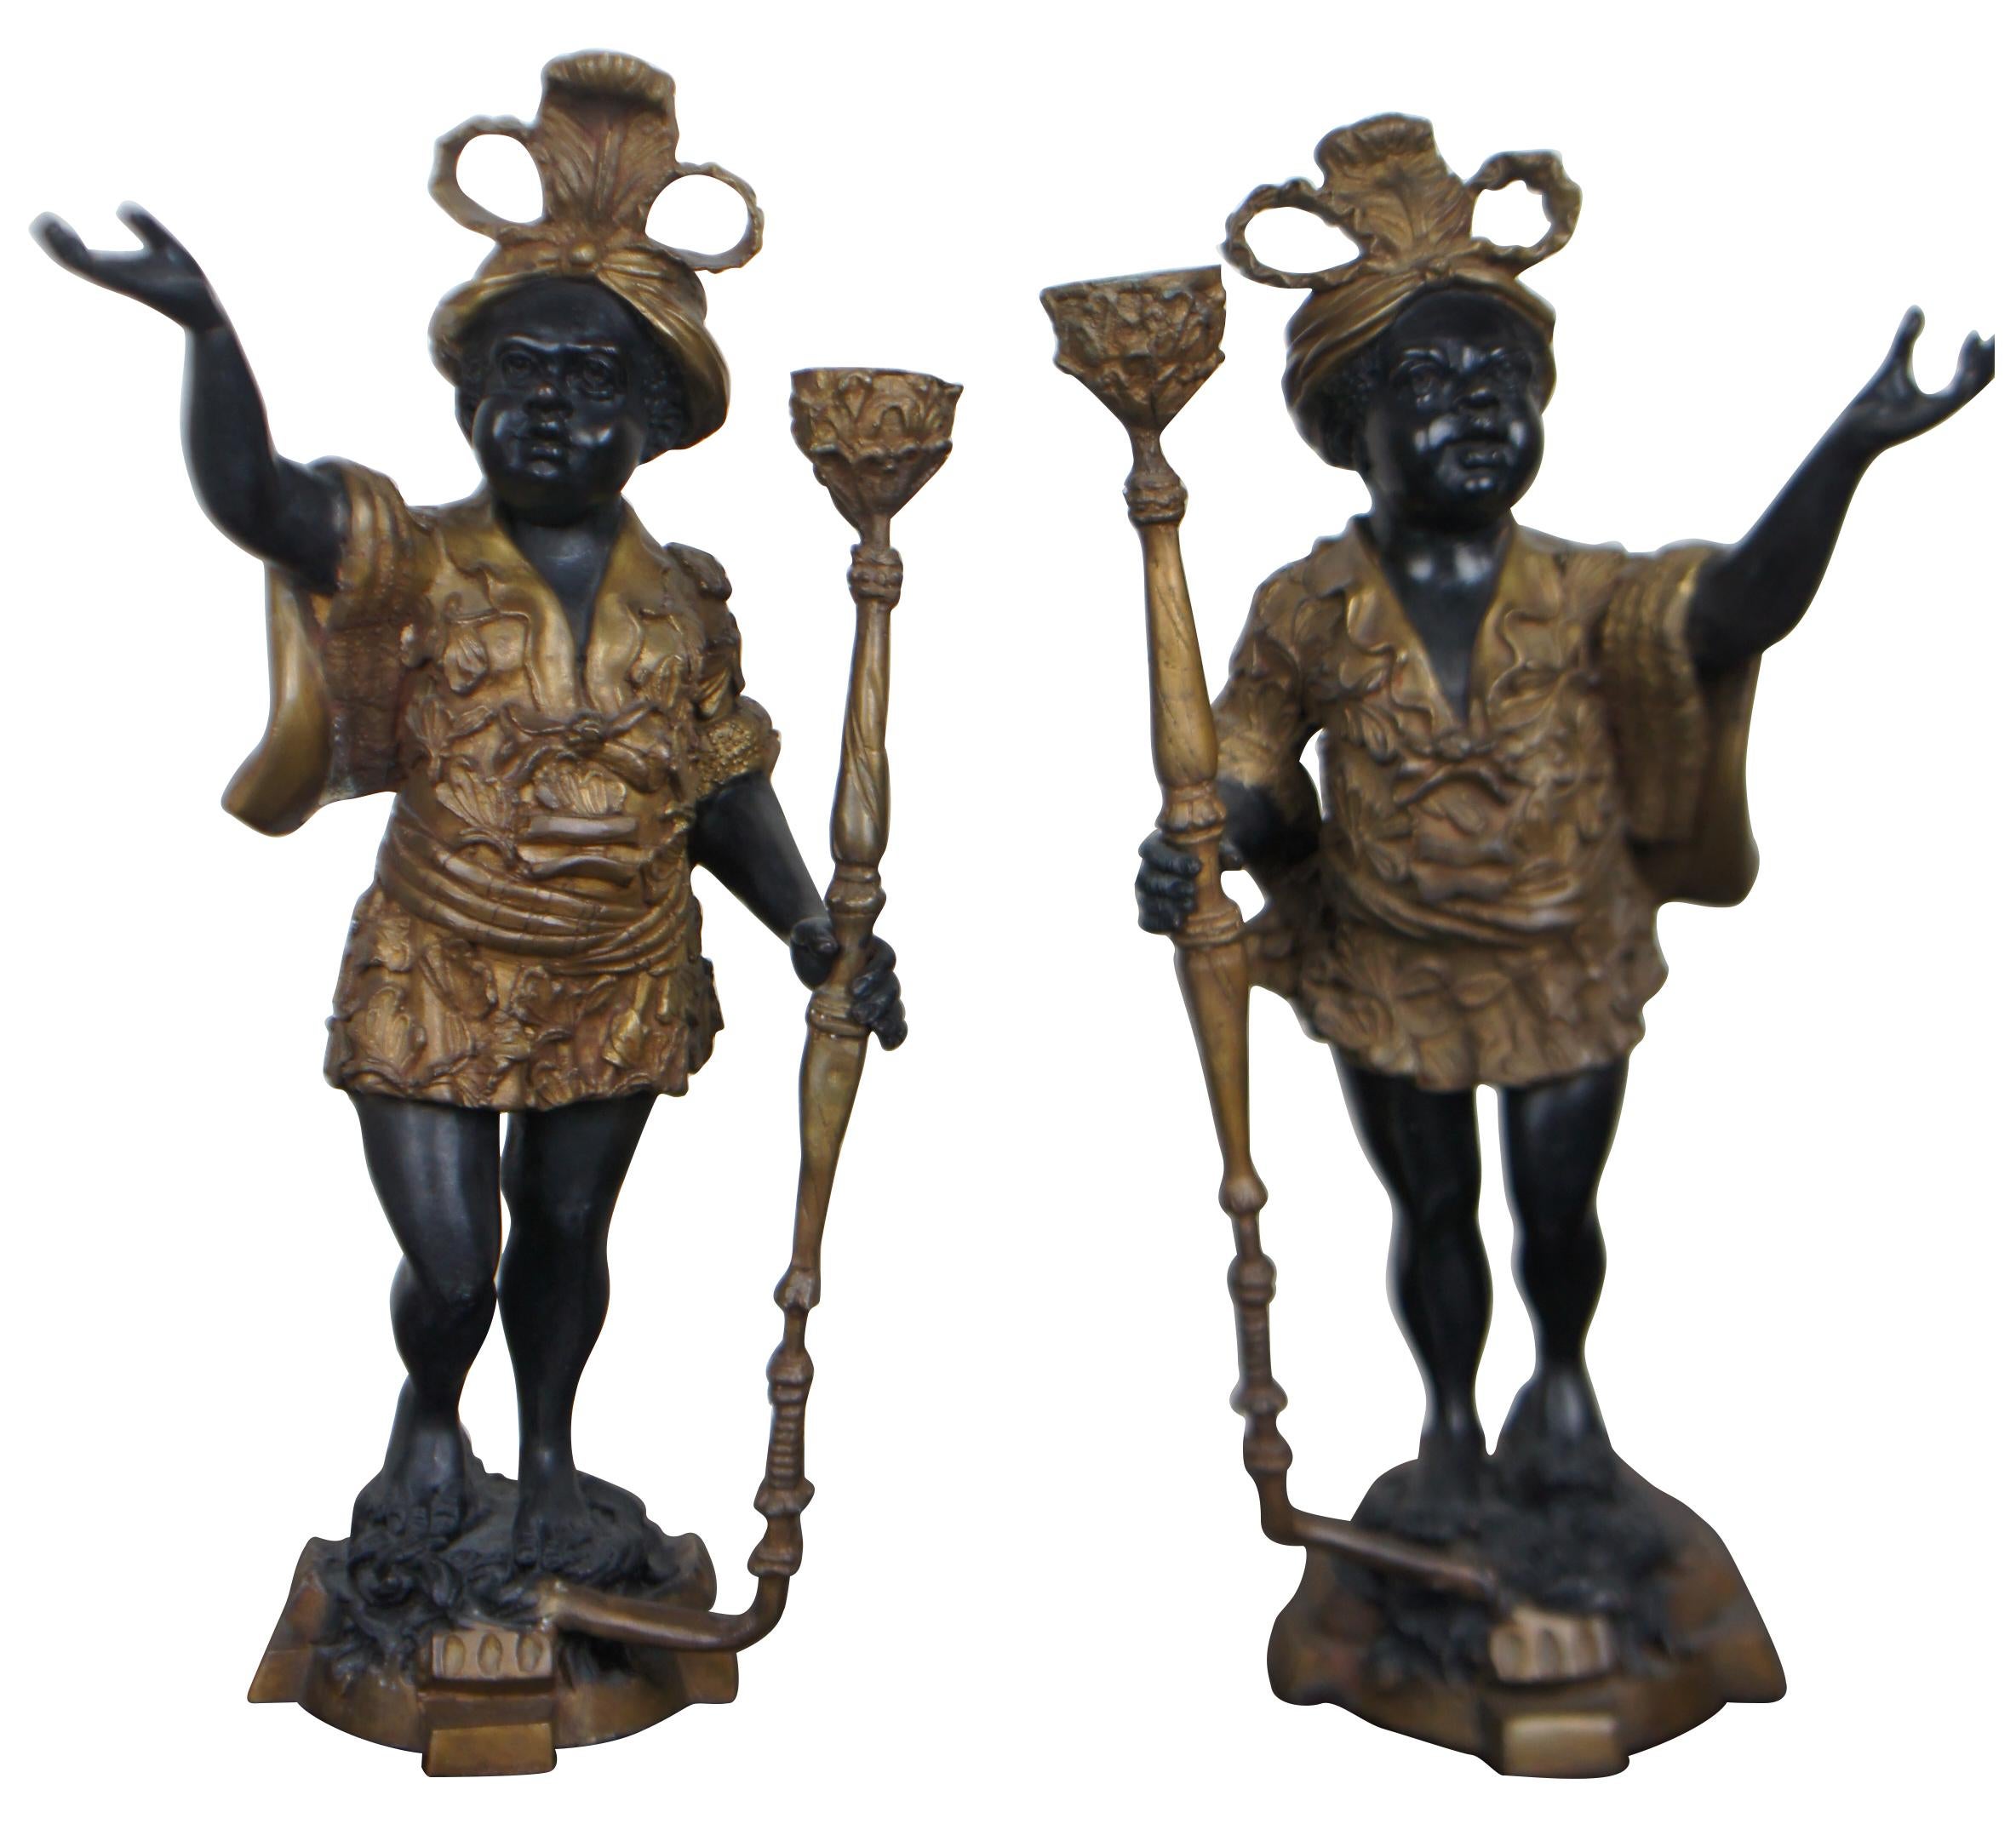 Pair of black and gold heavy cast bronze sculptures in the shape of boys in feathered turbans and baroque attire, holding candleholder staffs or torchieres (torch). Measures: 18